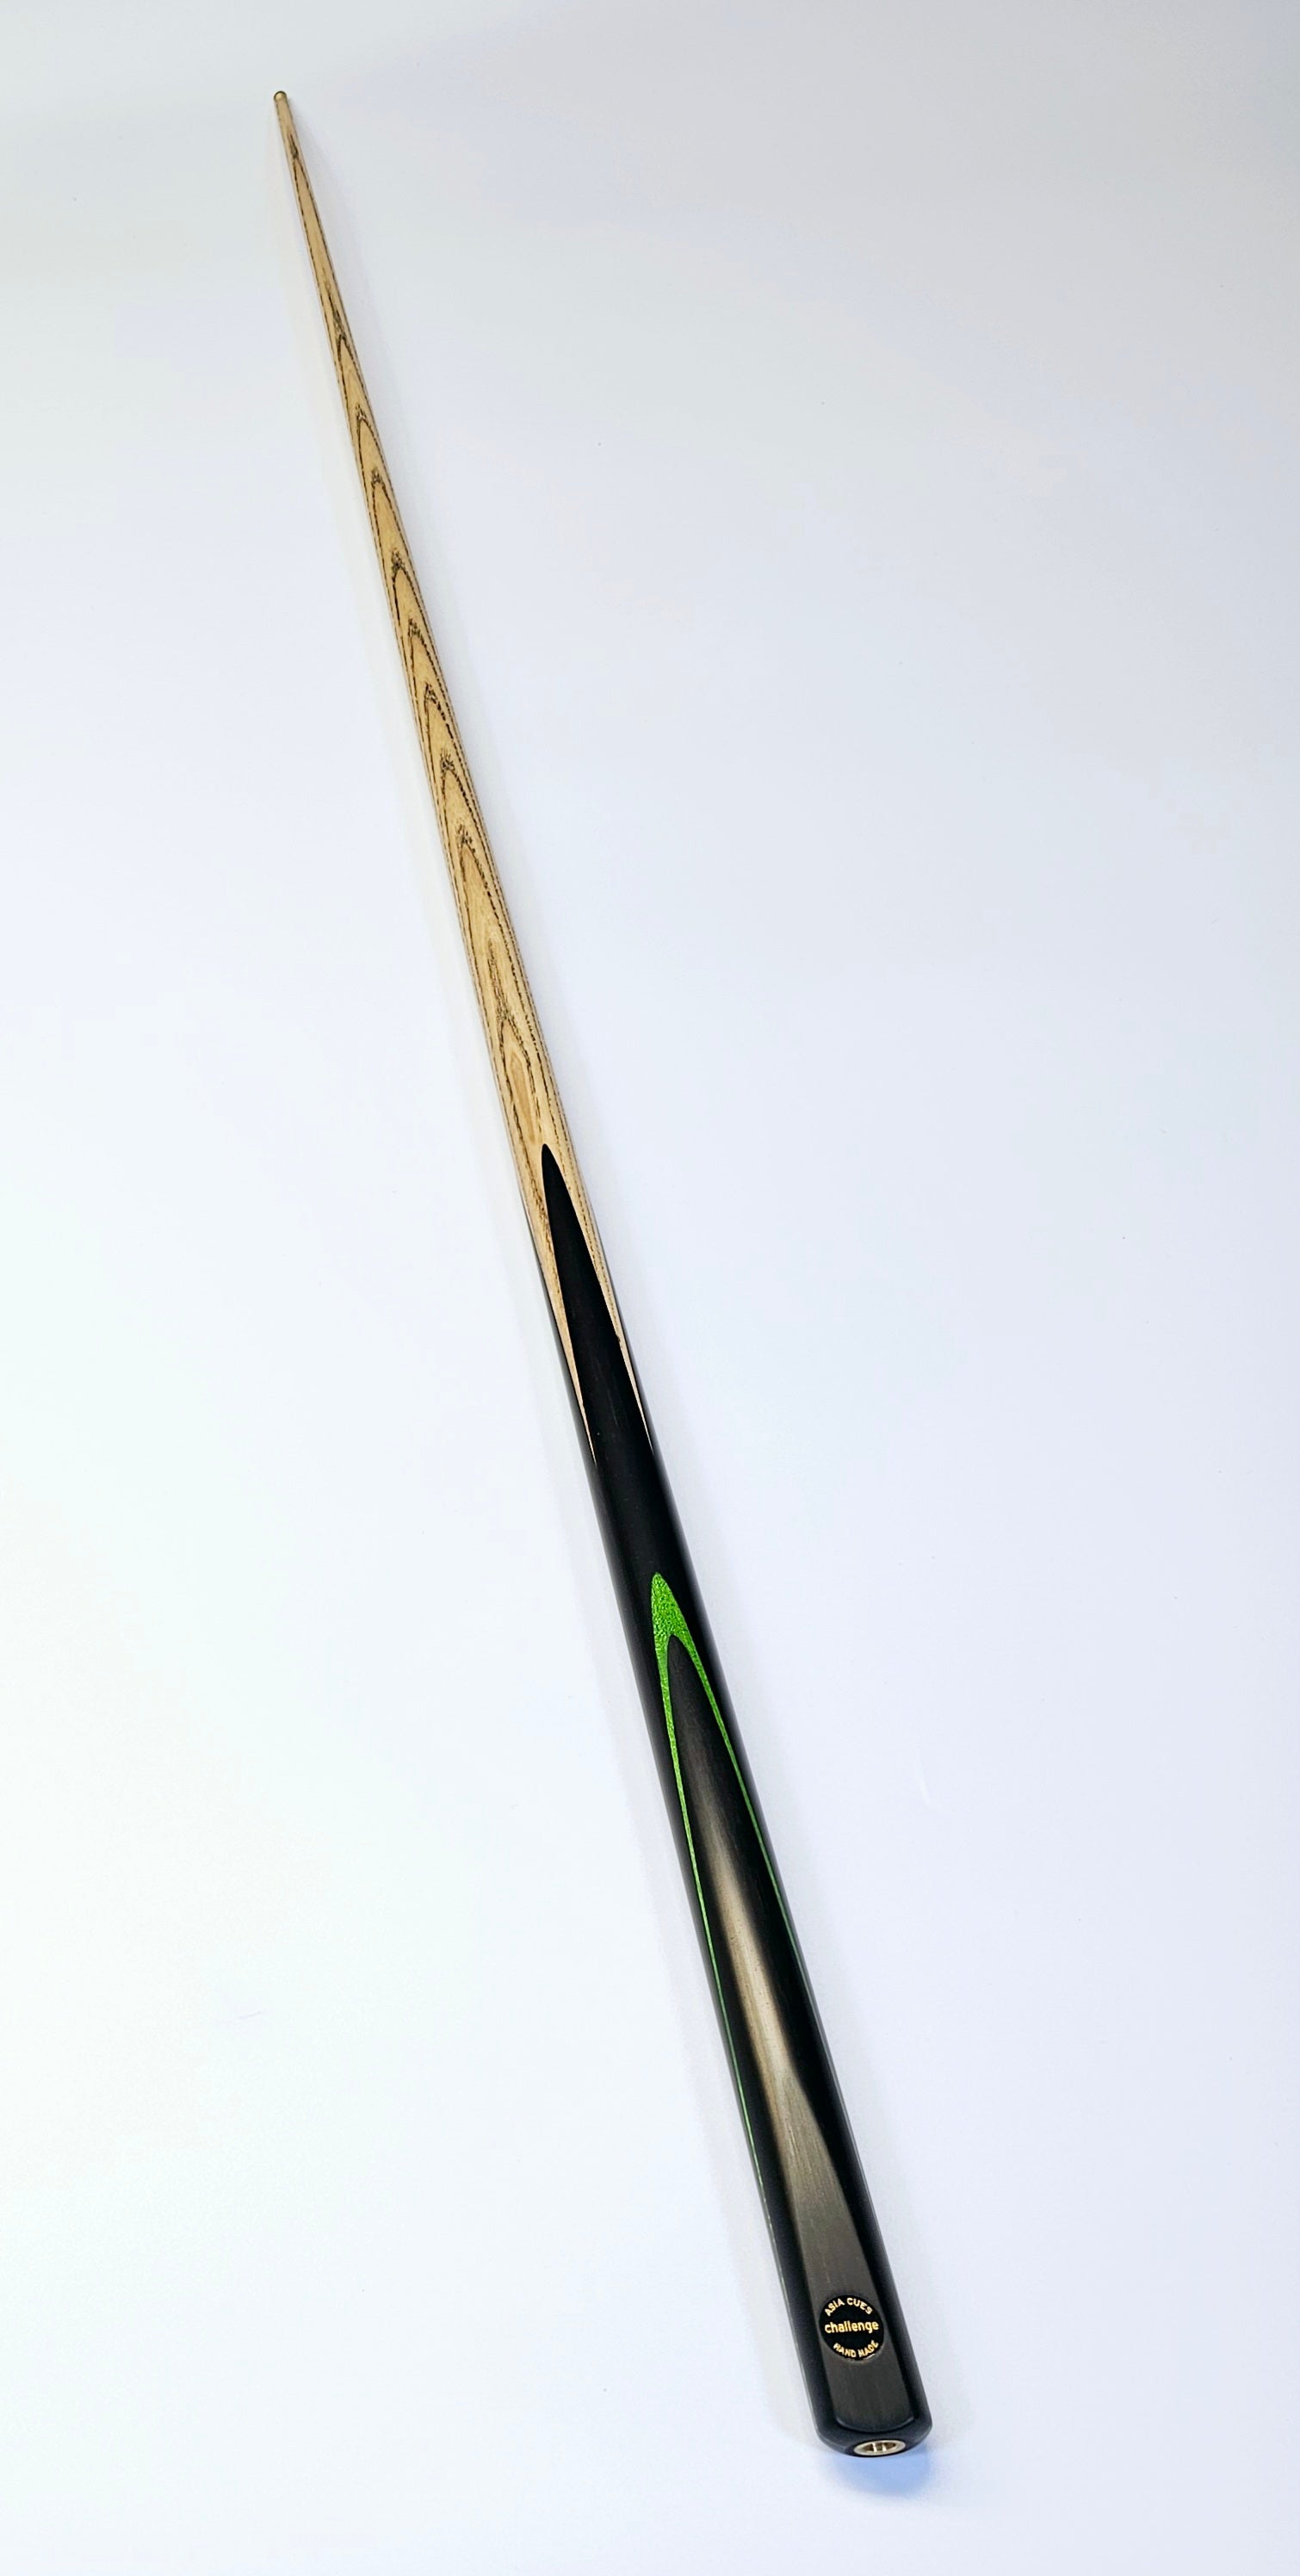 Asia Cues Challenge - One Piece Snooker Cue 9.7mm Tip, 18.1oz, 58"